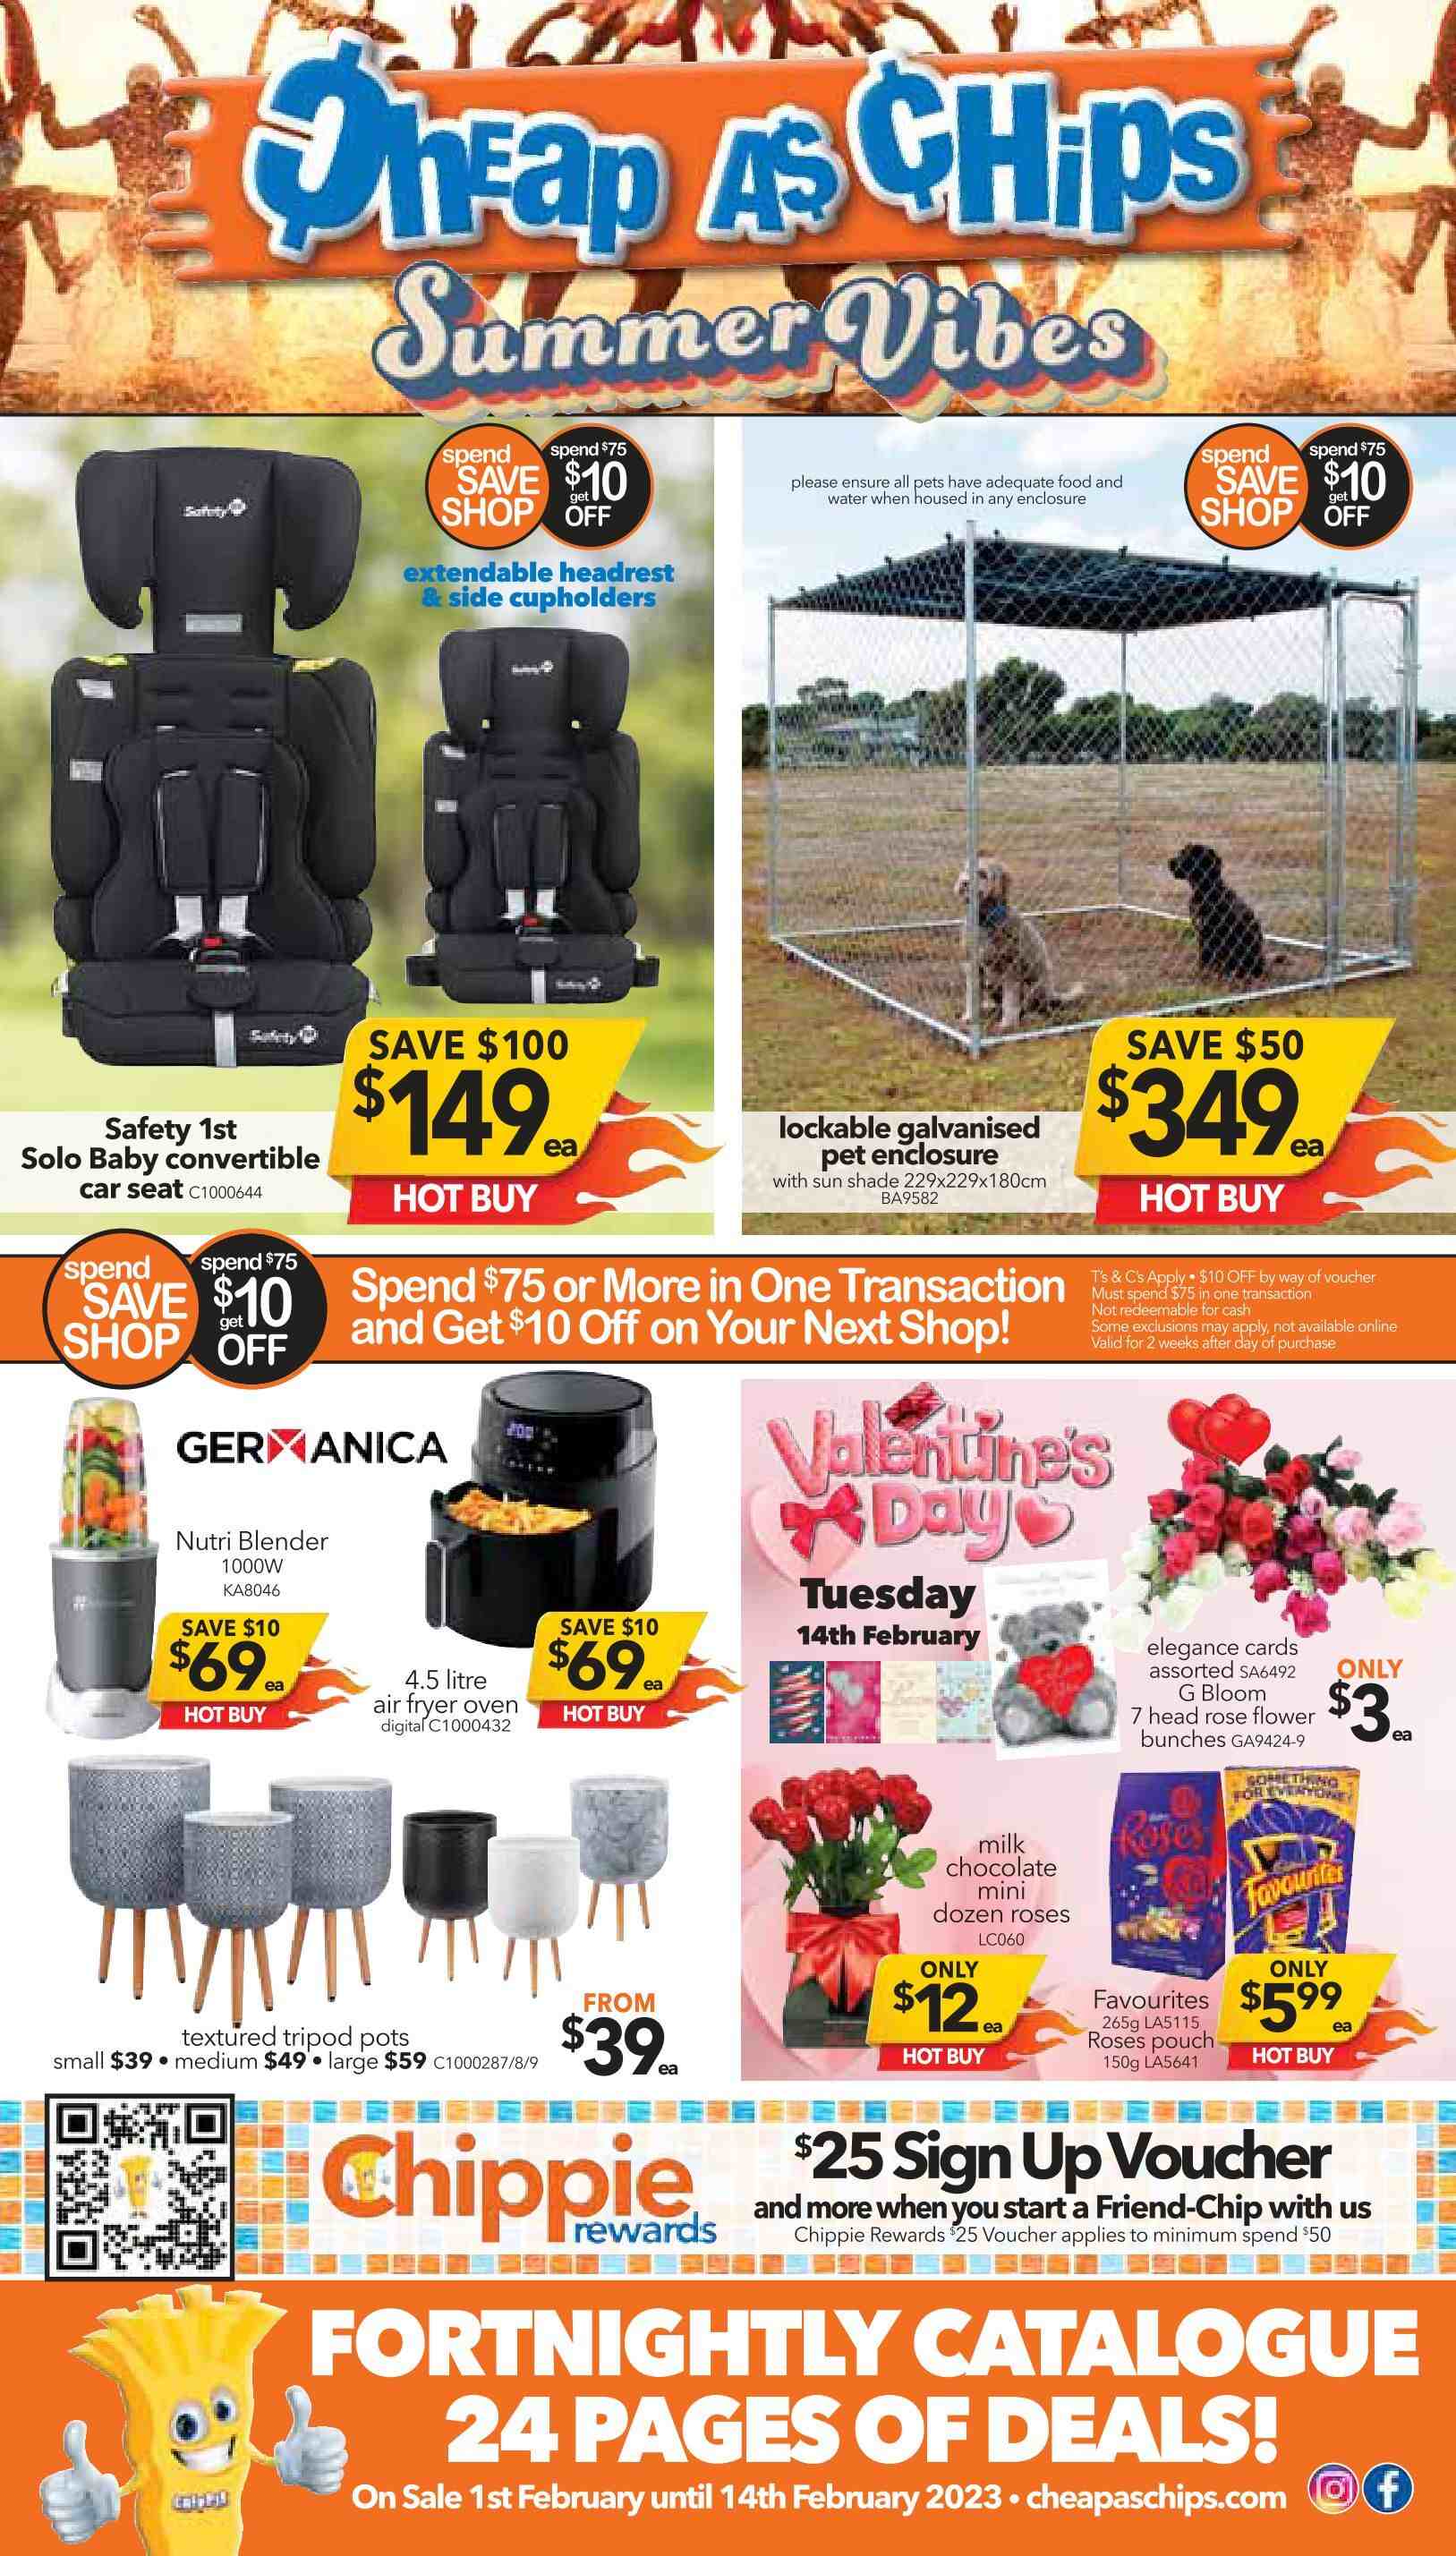 thumbnail - Cheap as Chips Catalogue - 1 Feb 2023 - 14 Feb 2023 - Sales products - milk chocolate, chocolate, chips, pot, pet enclosure, blender, sun shade, bunches, rose. Page 1.